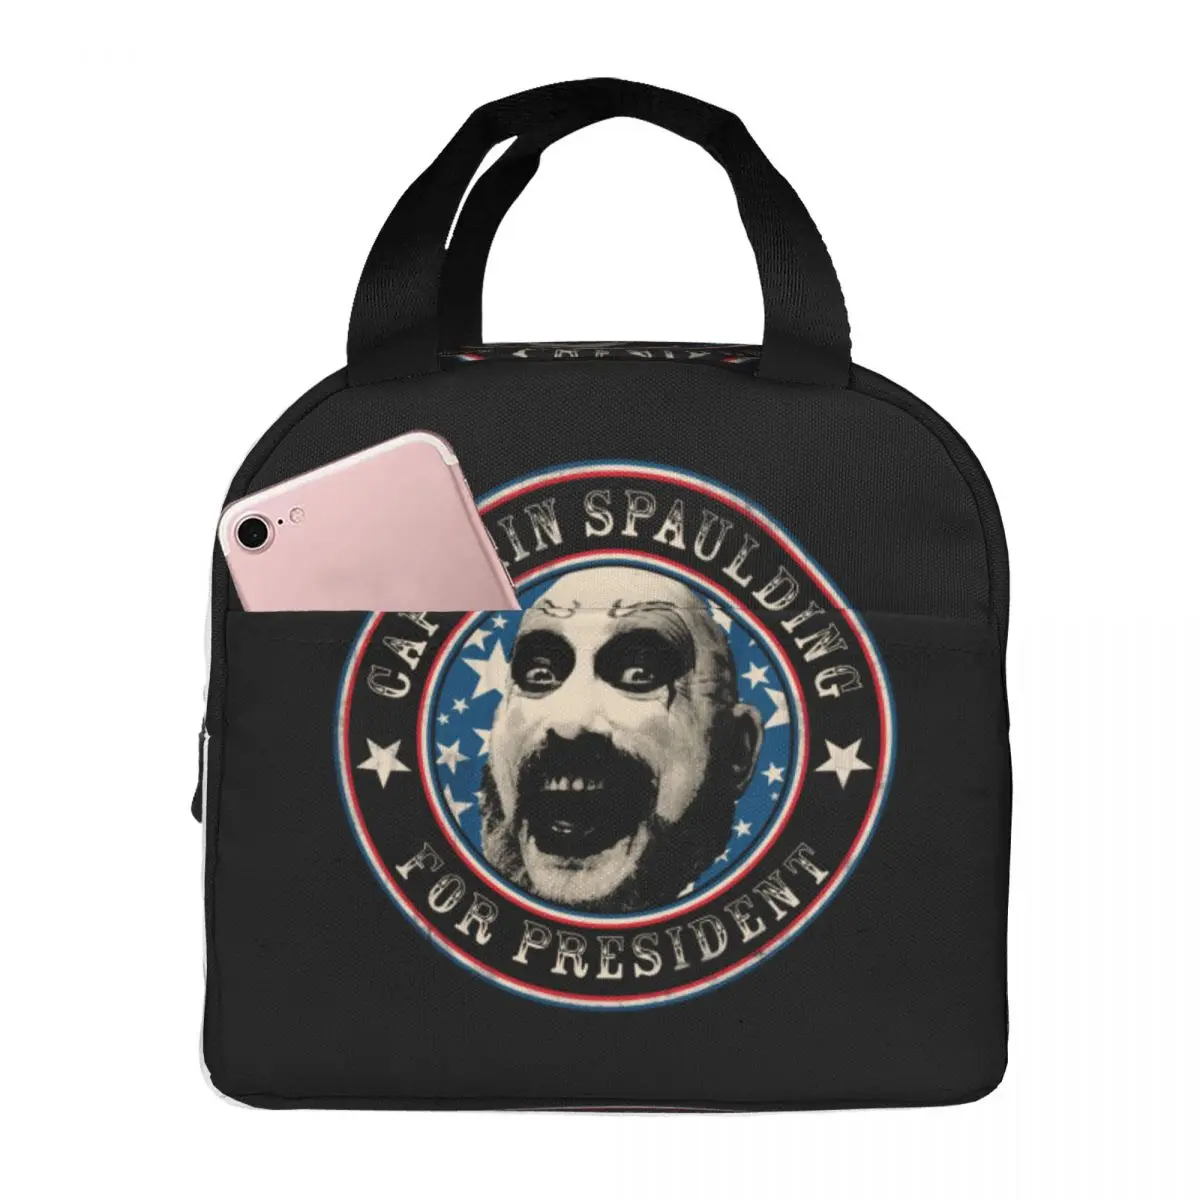 Captain Spaulding For President Lunch Bags Portable Insulated Oxford Cooler Thermal Cold Food Picnic Lunch Box for Women Girl